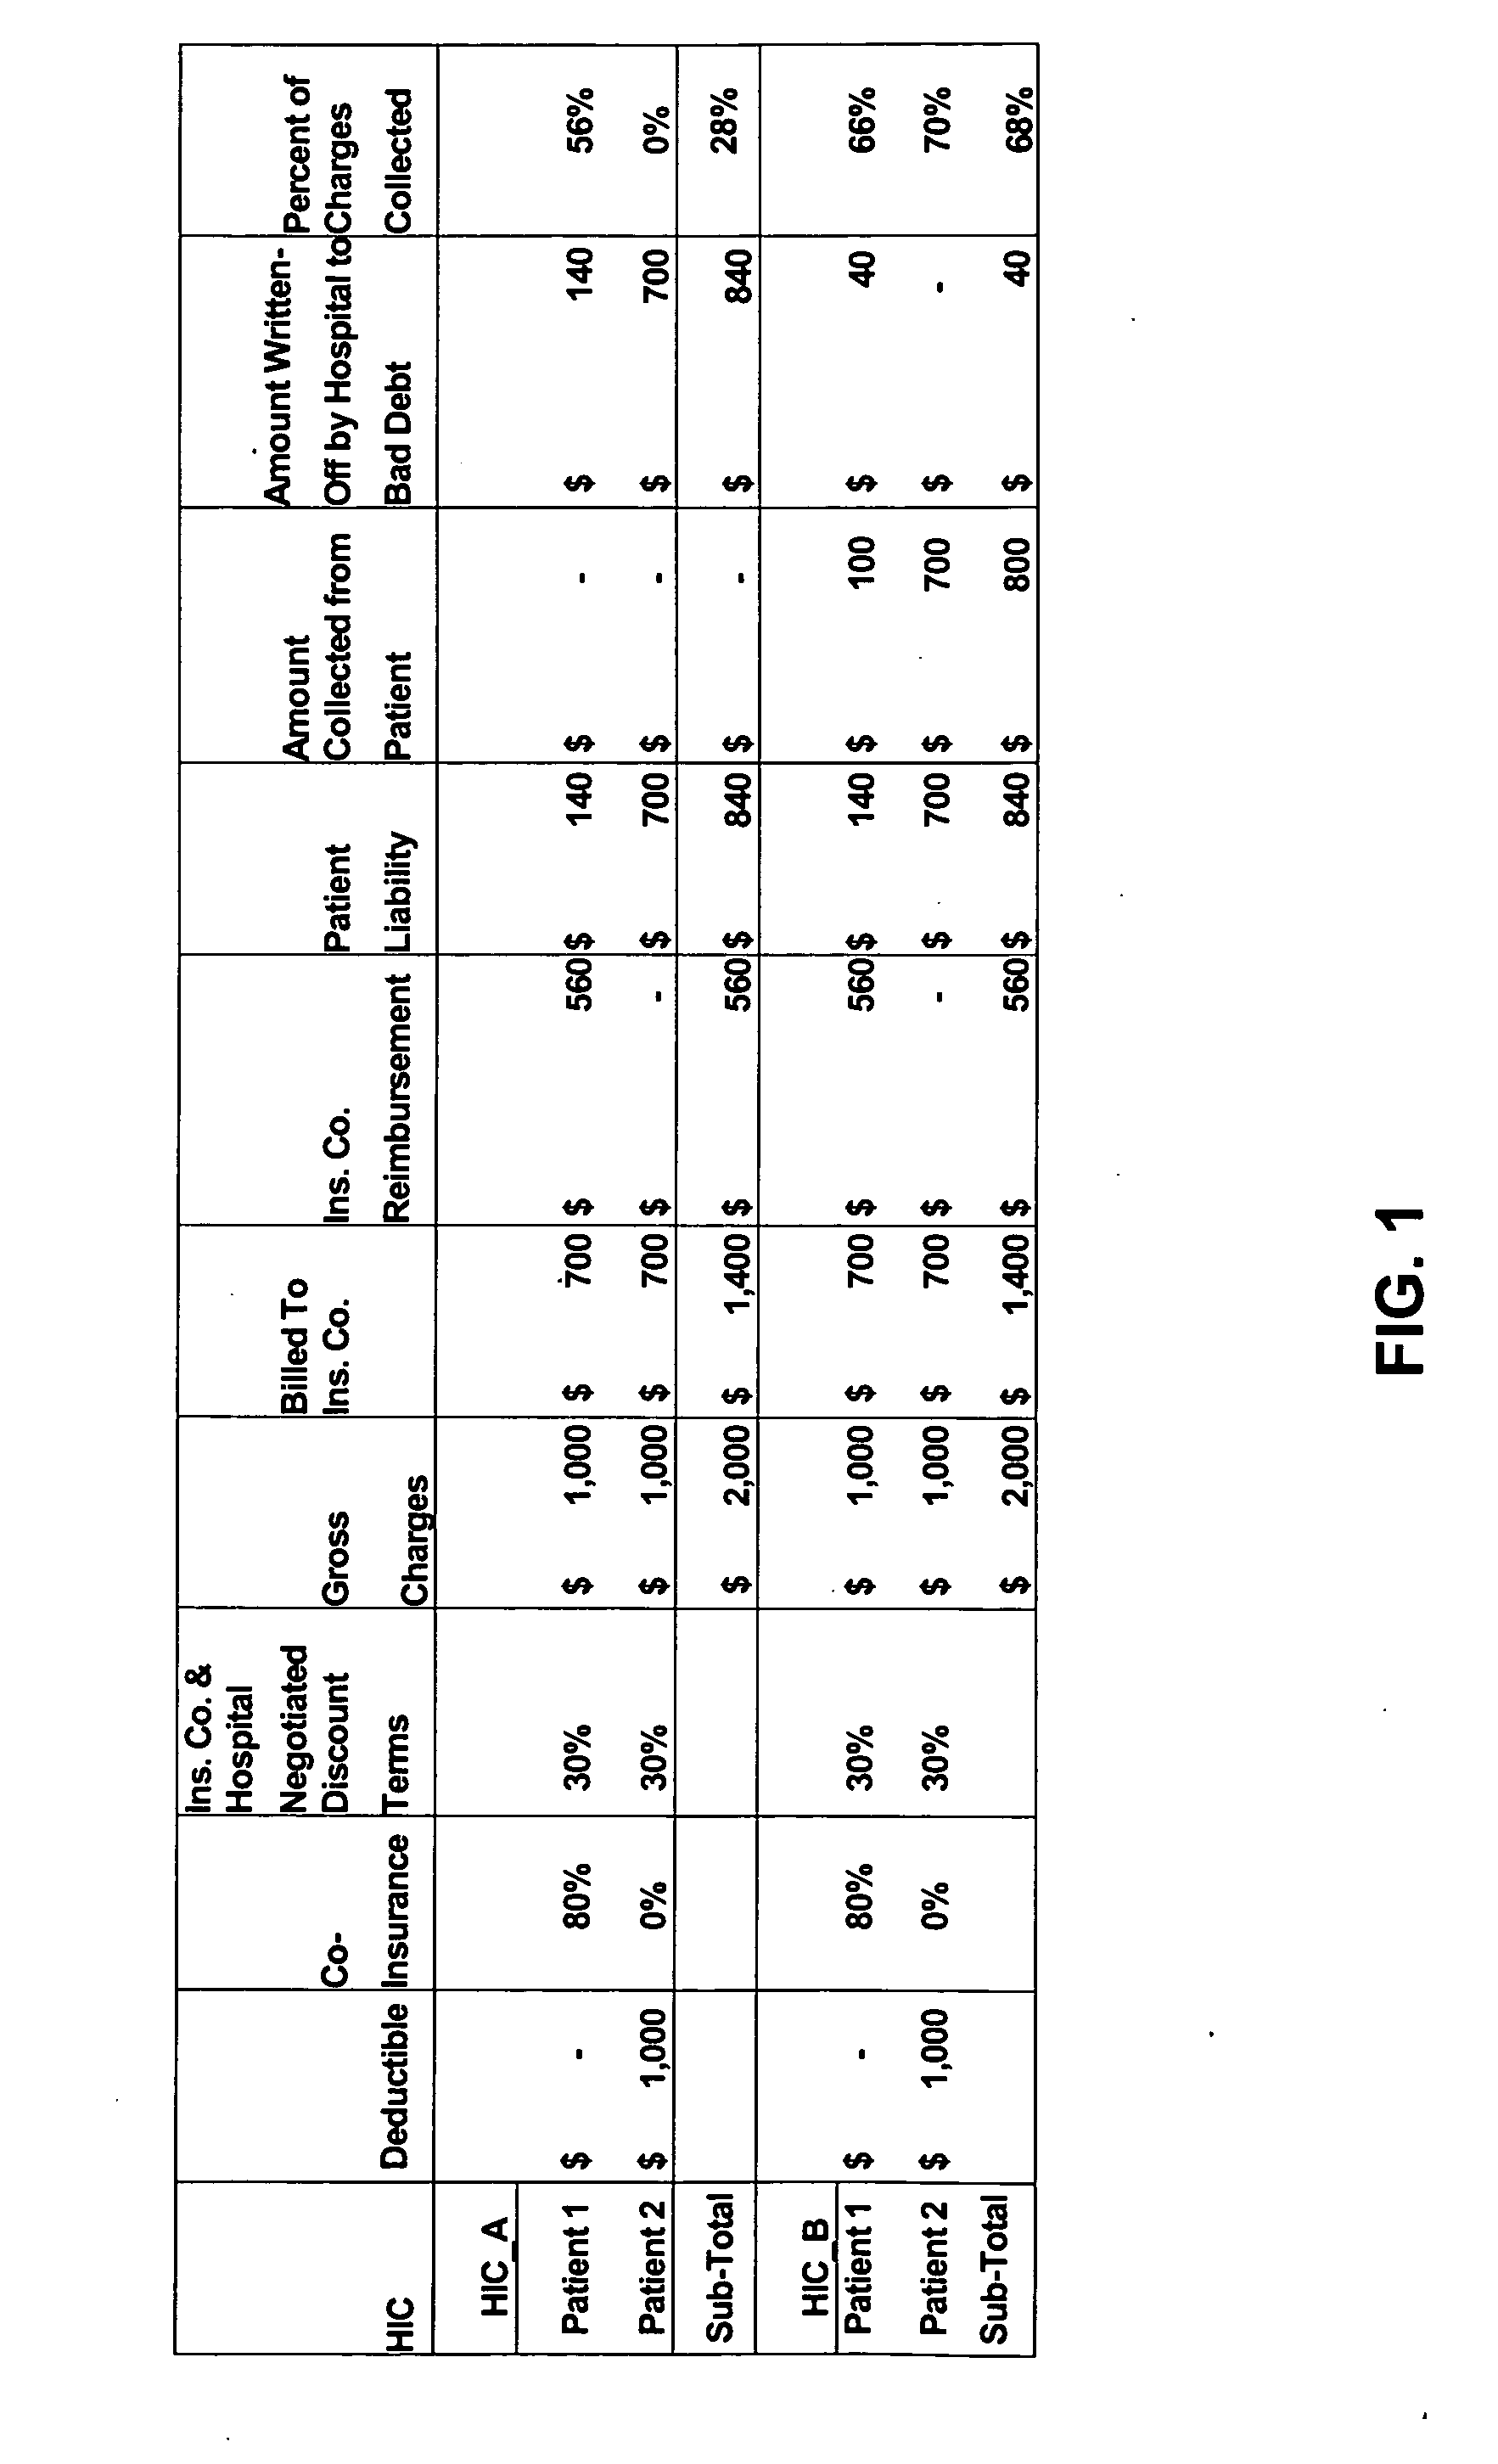 Method for predicting the payment of medical debt